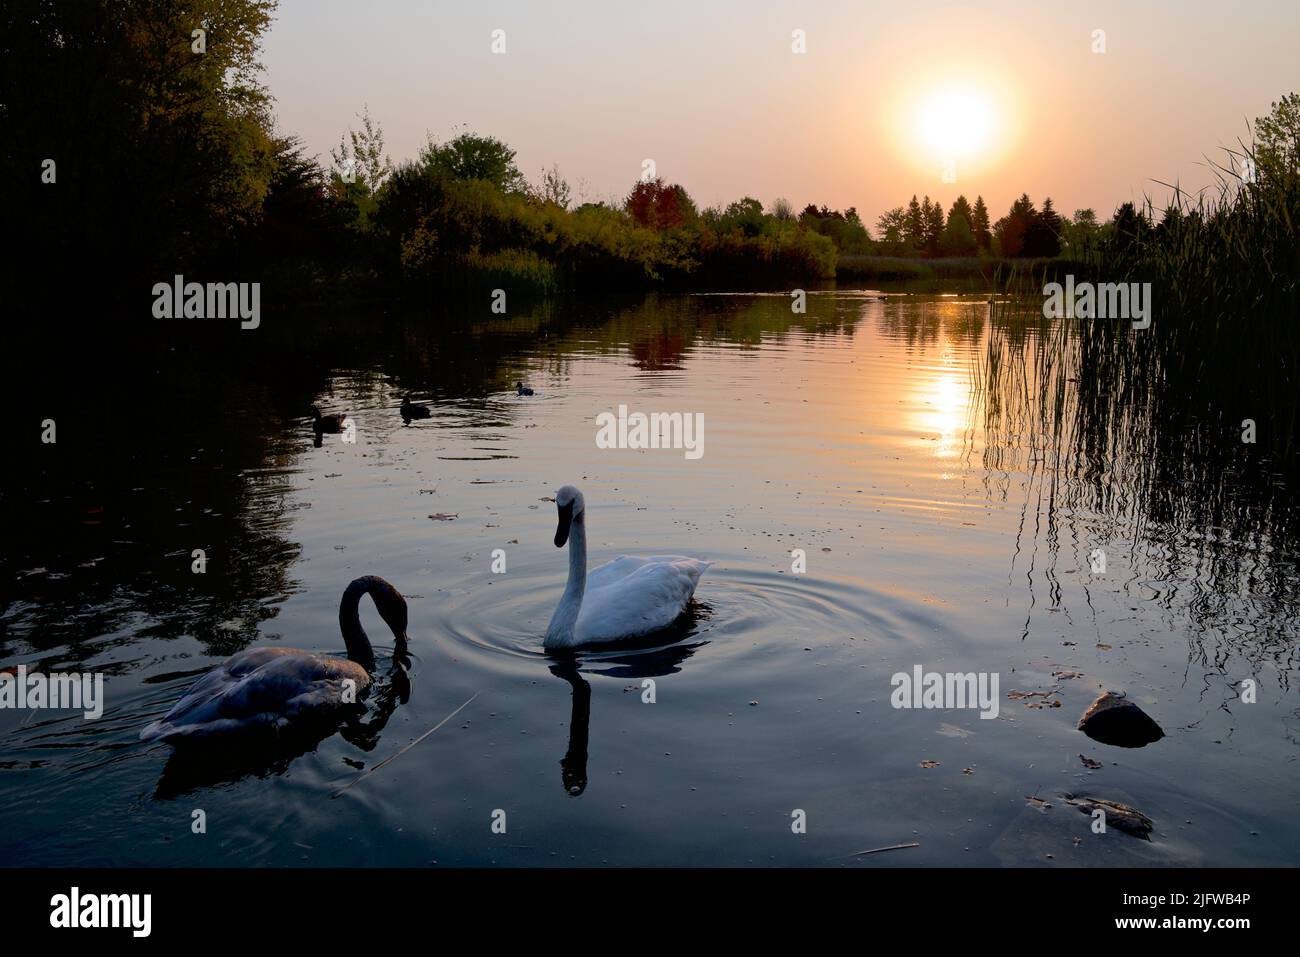 A pair of swam in the pond of the public park in sunset Stock Photo